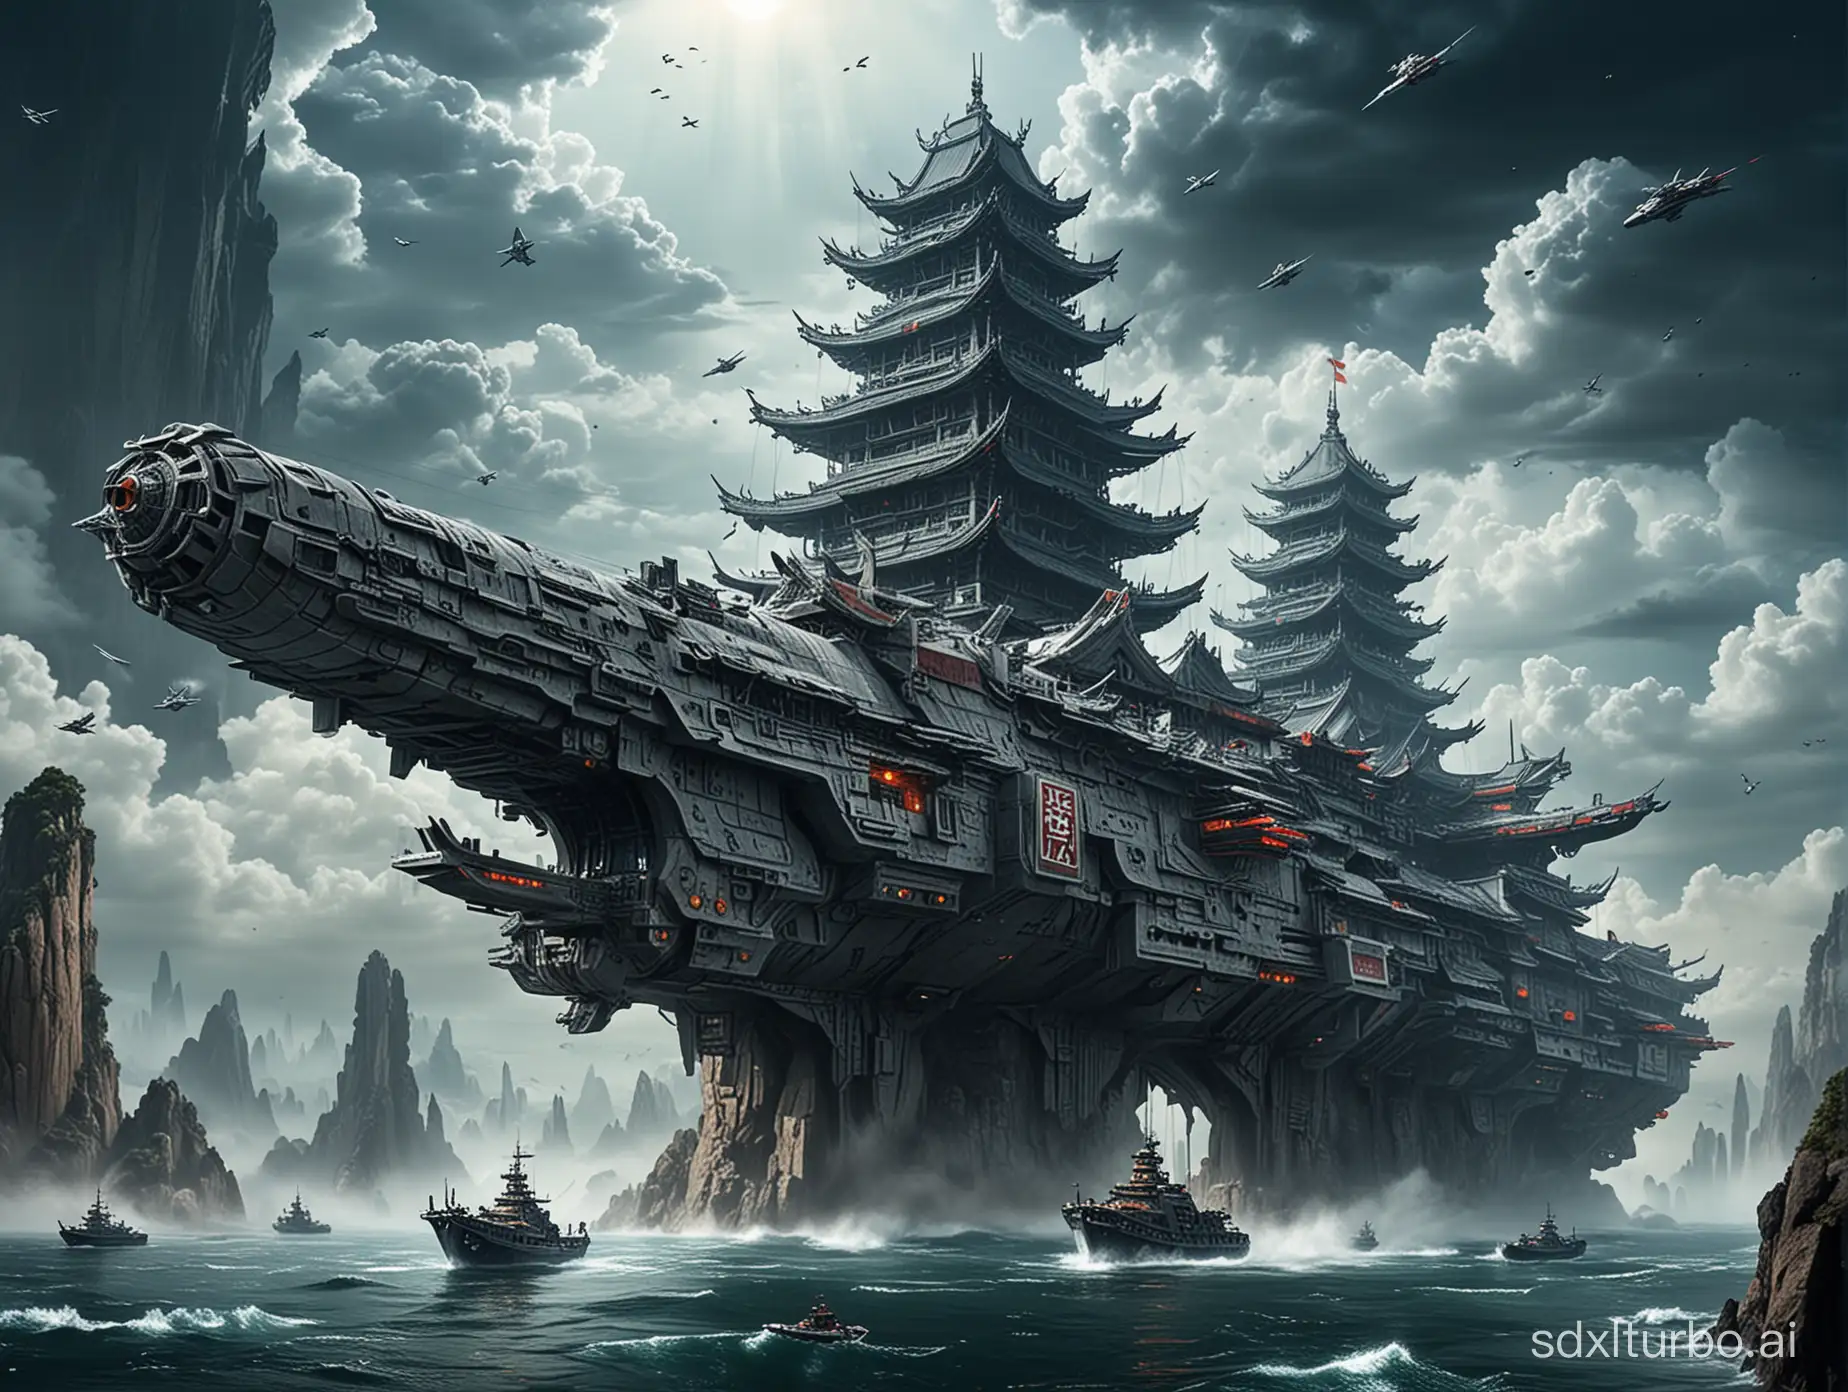 There are ancient Chinese buildings on the science fiction space battleship.